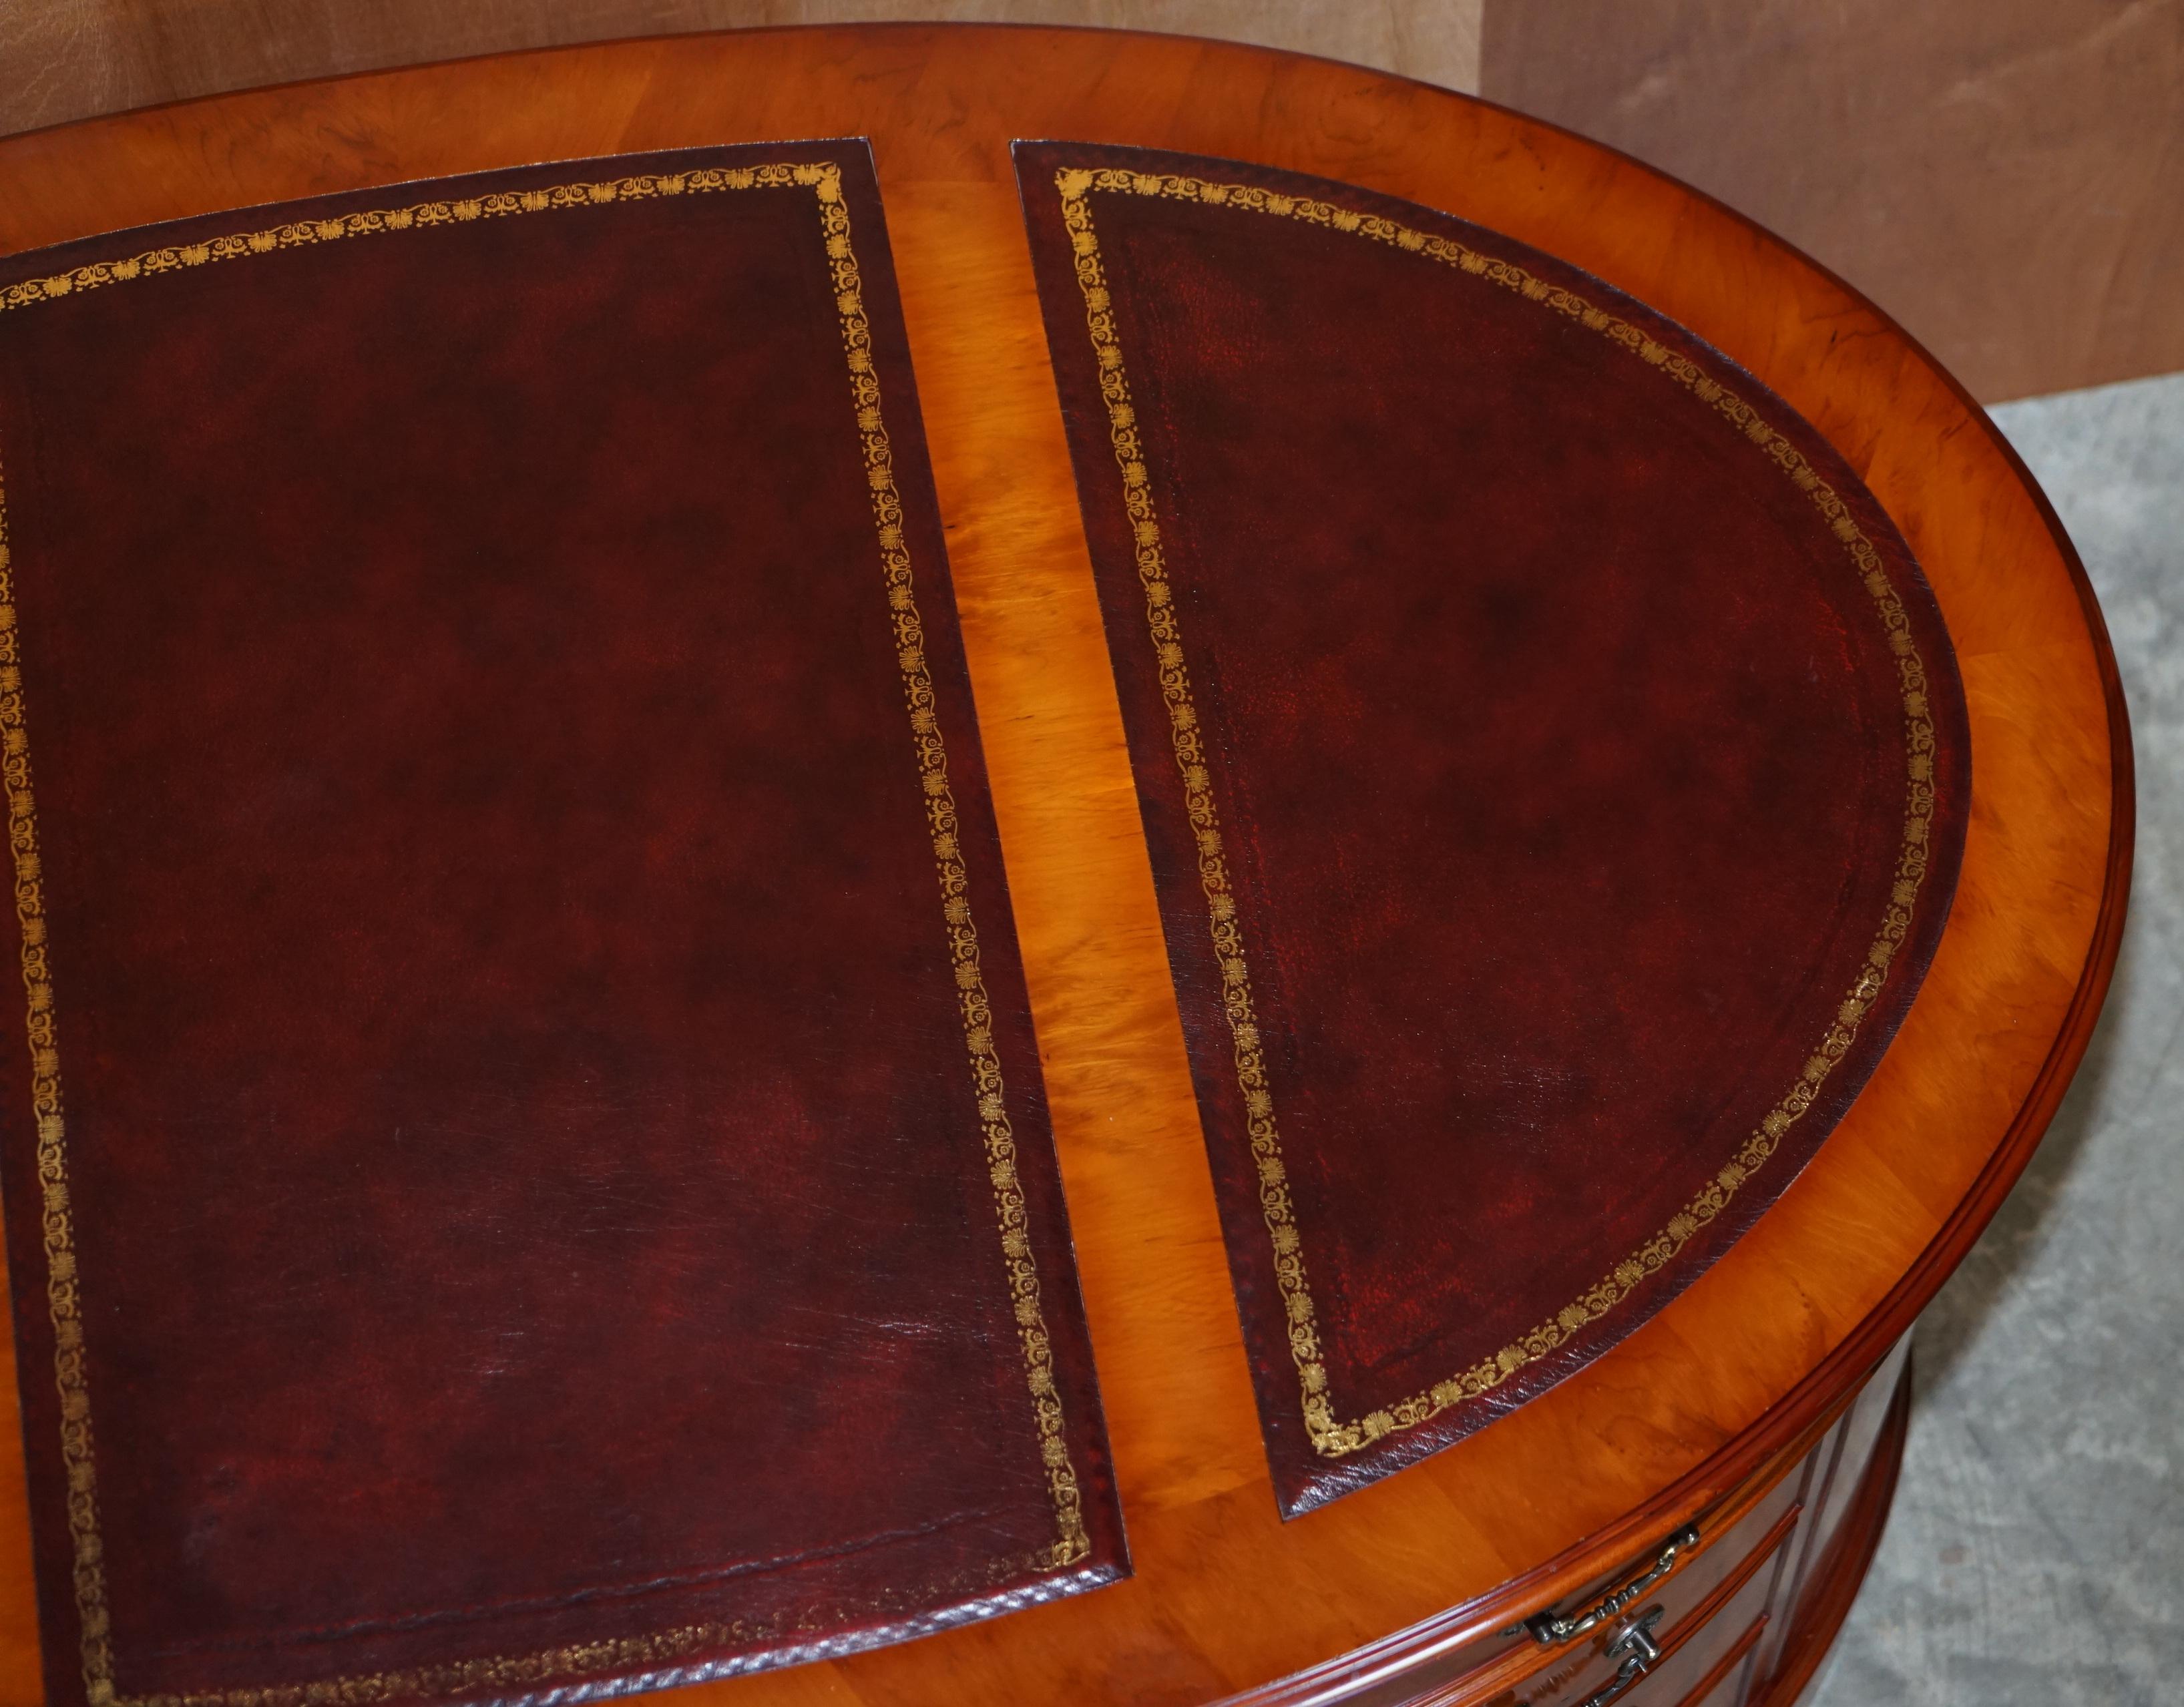 Hand-Crafted Burr Yew Wood Oval Pedestal Partners Desk Oxblood Leather Top Butlers Trays